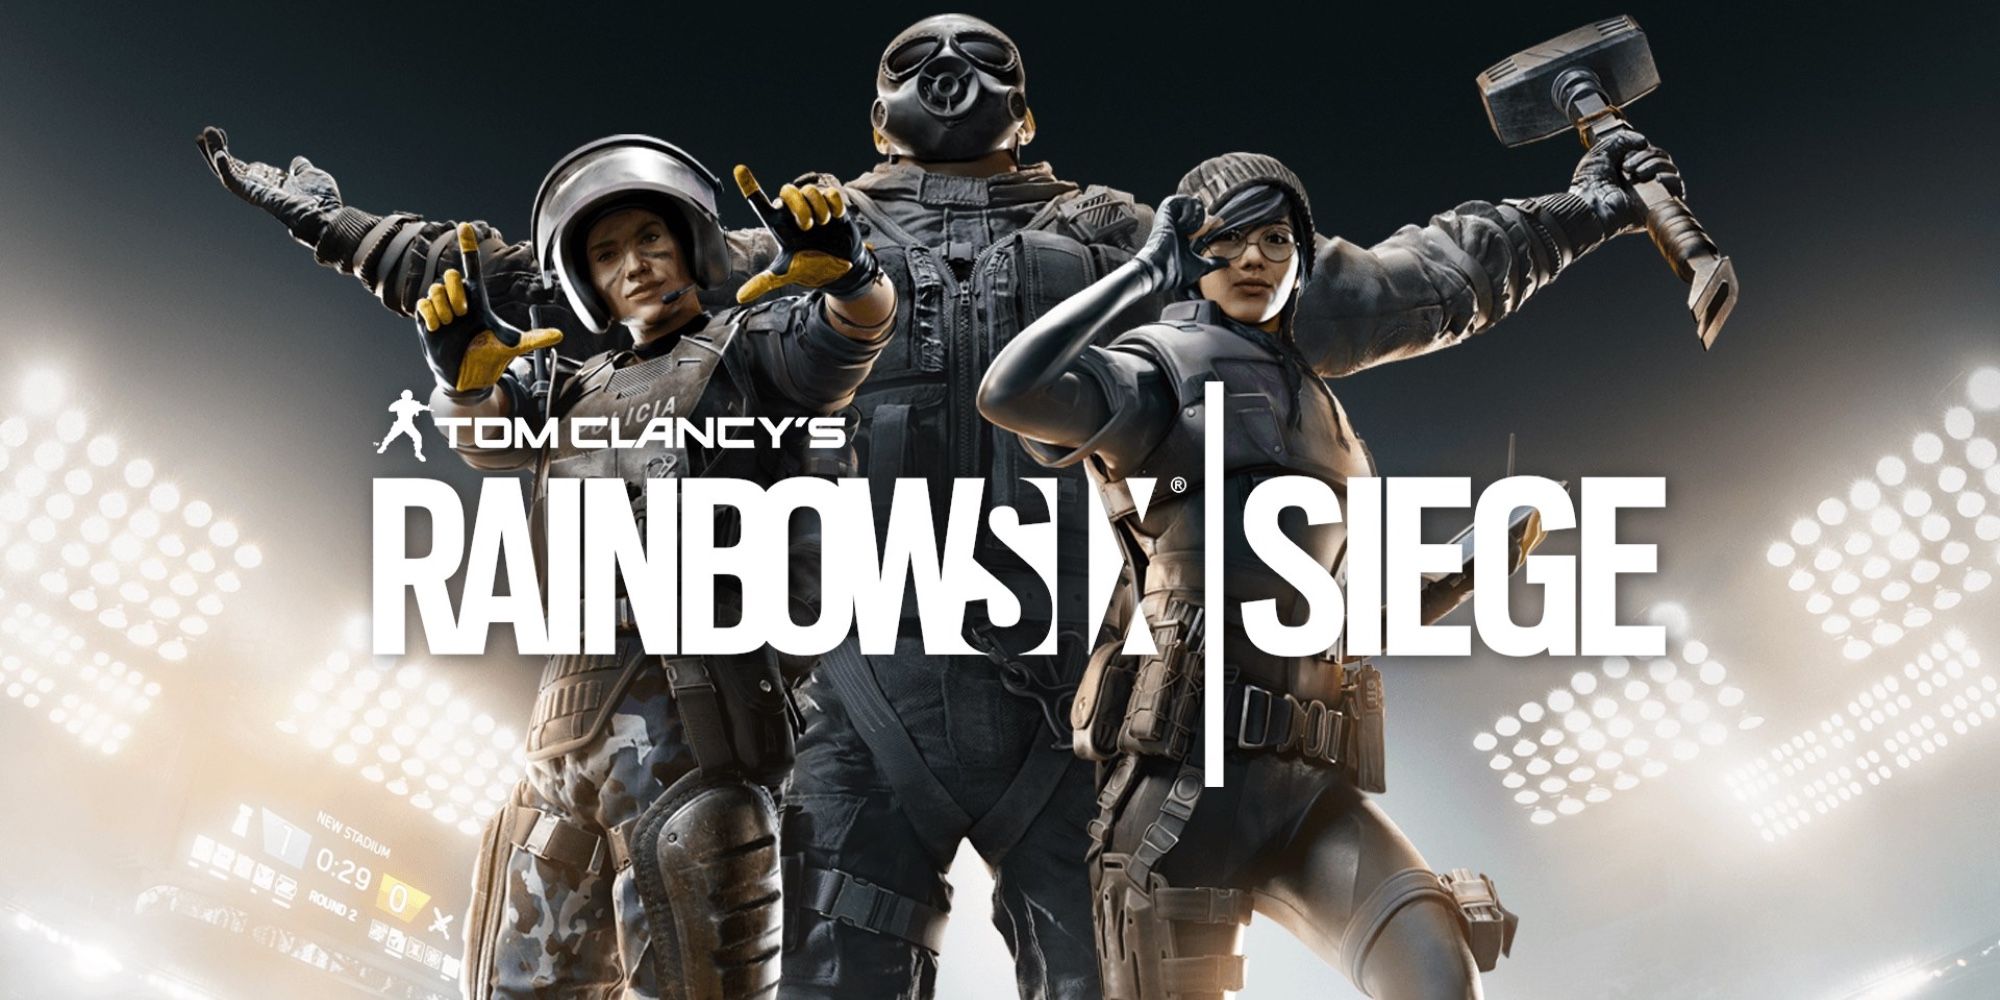 Rainbow Six Siege poster soldiers posing